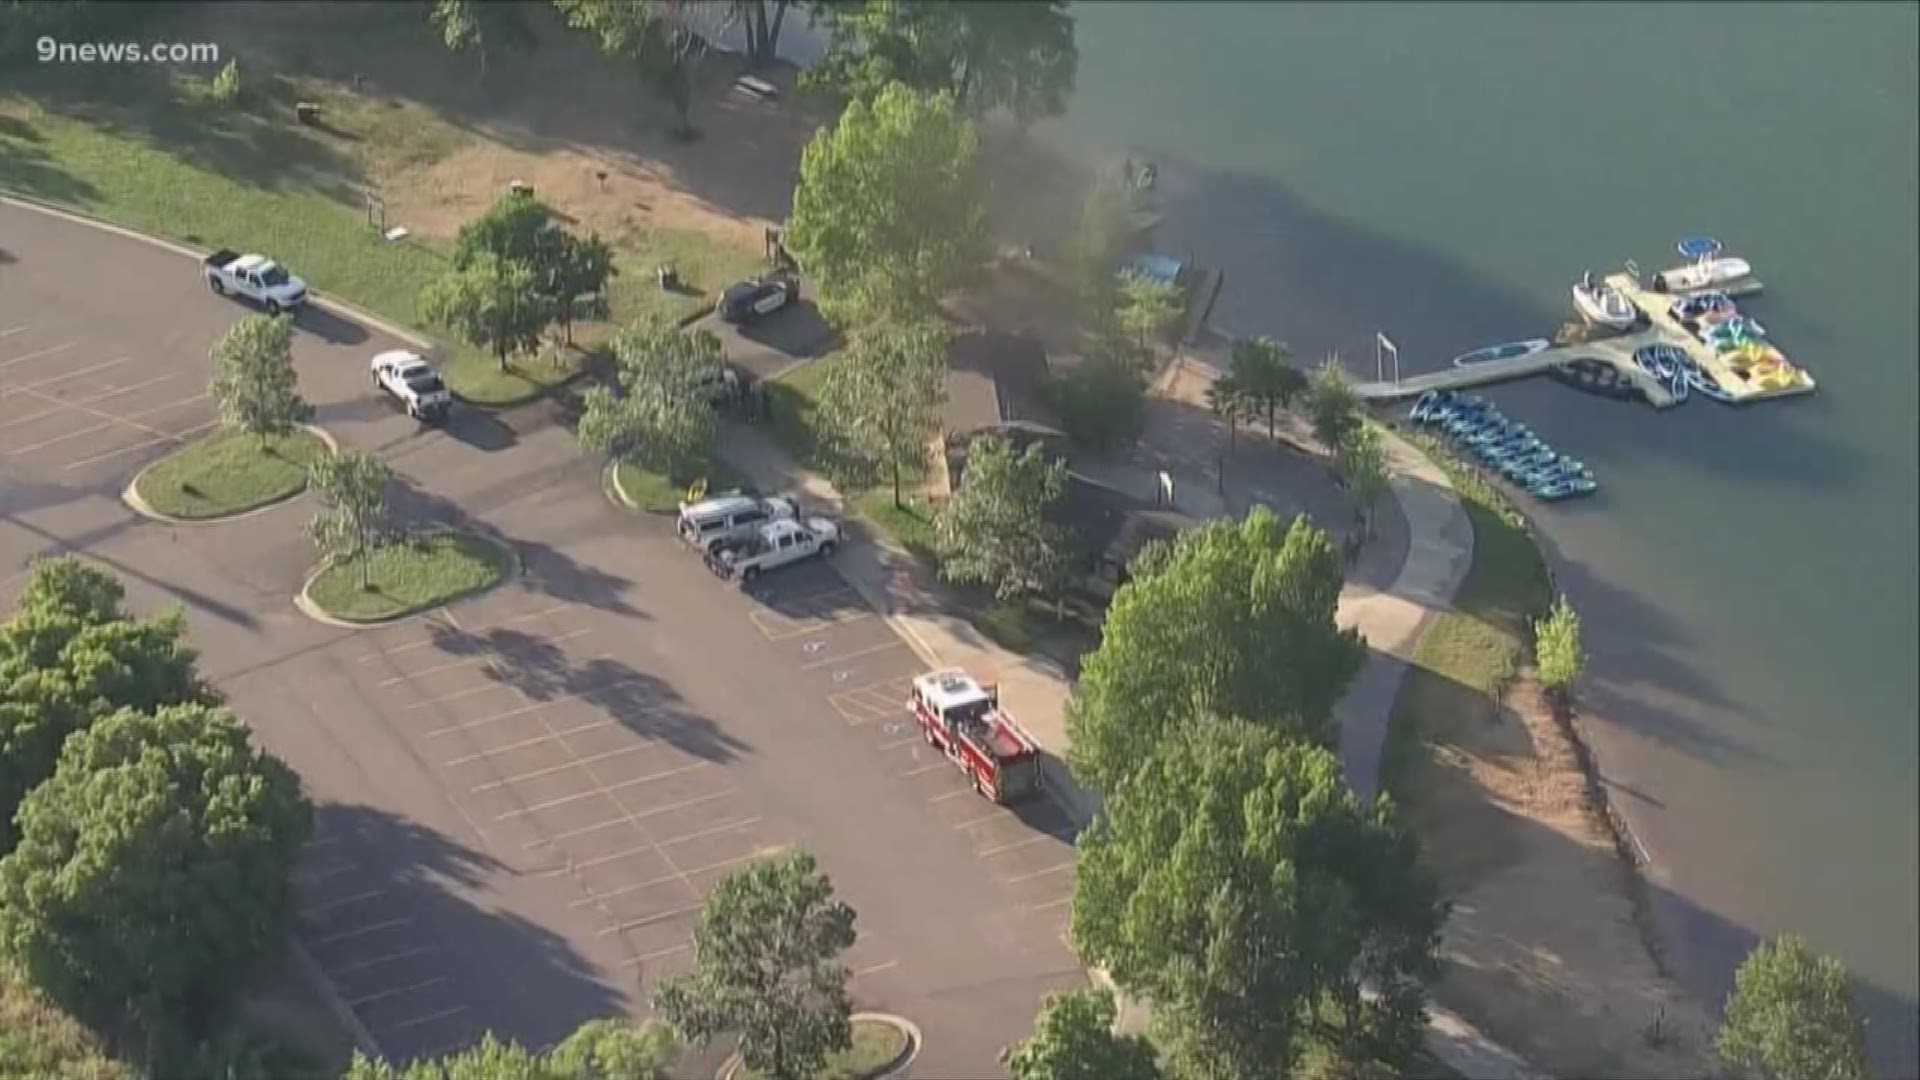 A coroner is working to identify a man who was found dead in Soda Lake in Lakewood on Wednesday morning.